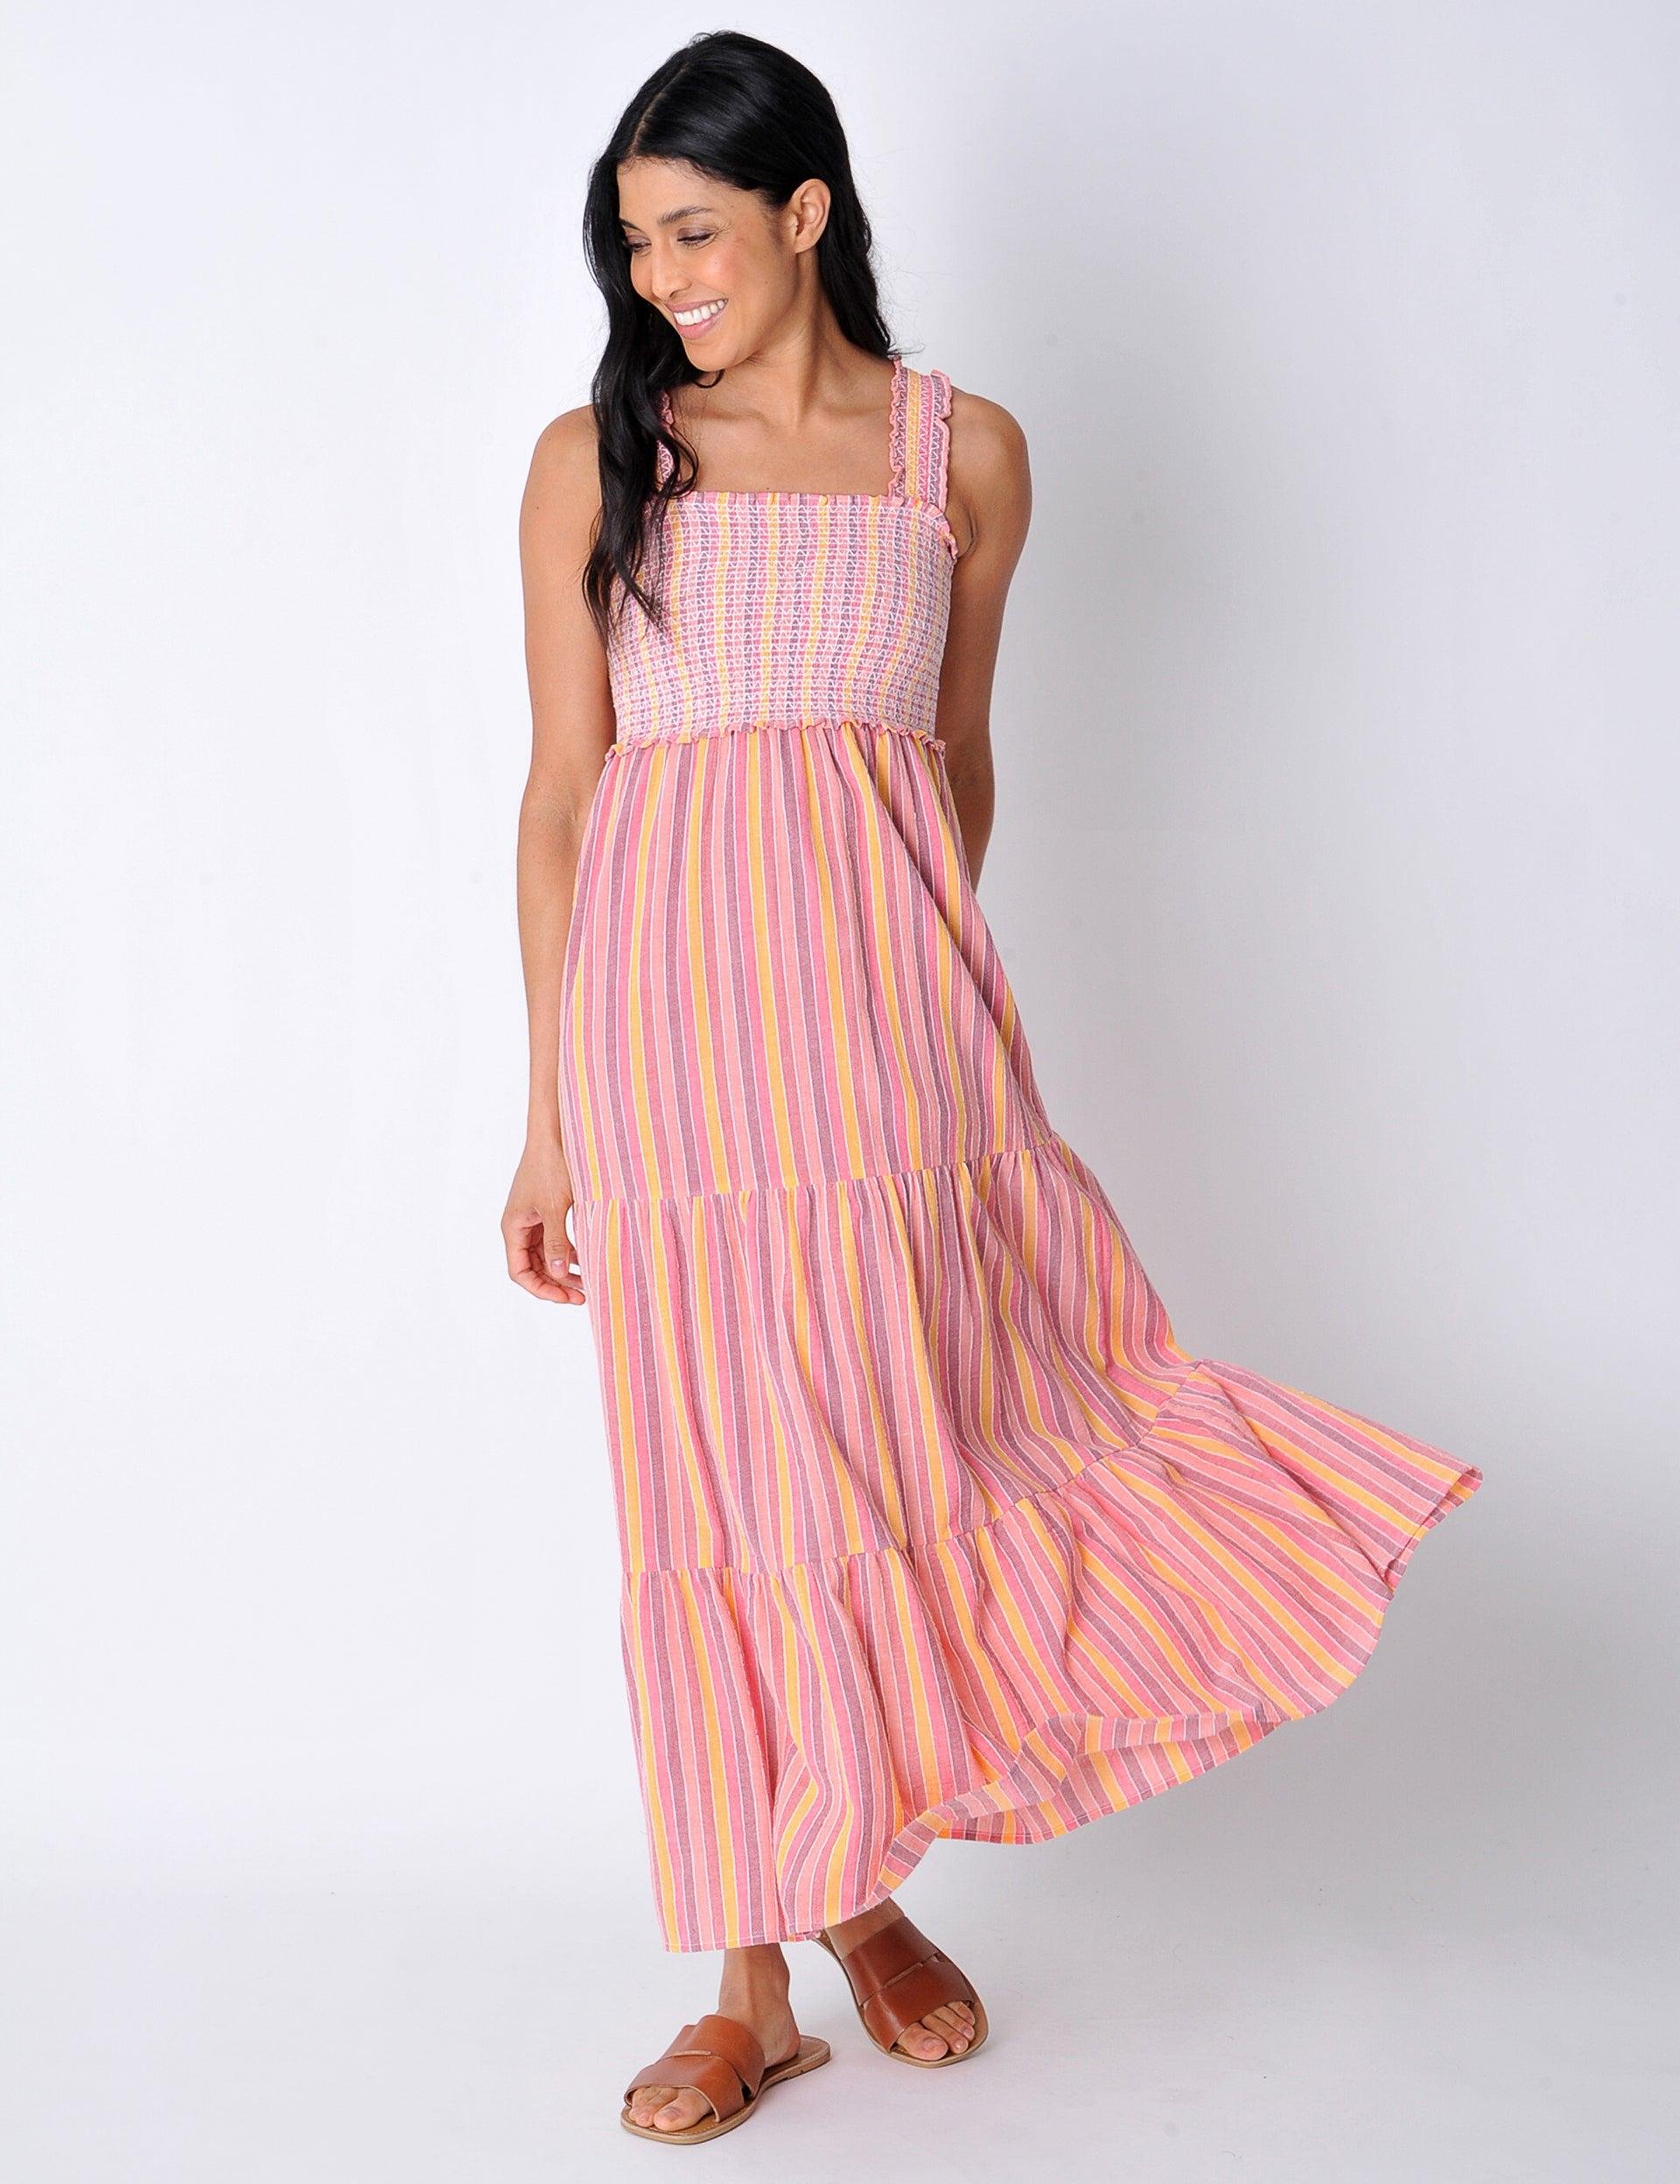 Pothilly Dress in Multi-Pink by BURGS